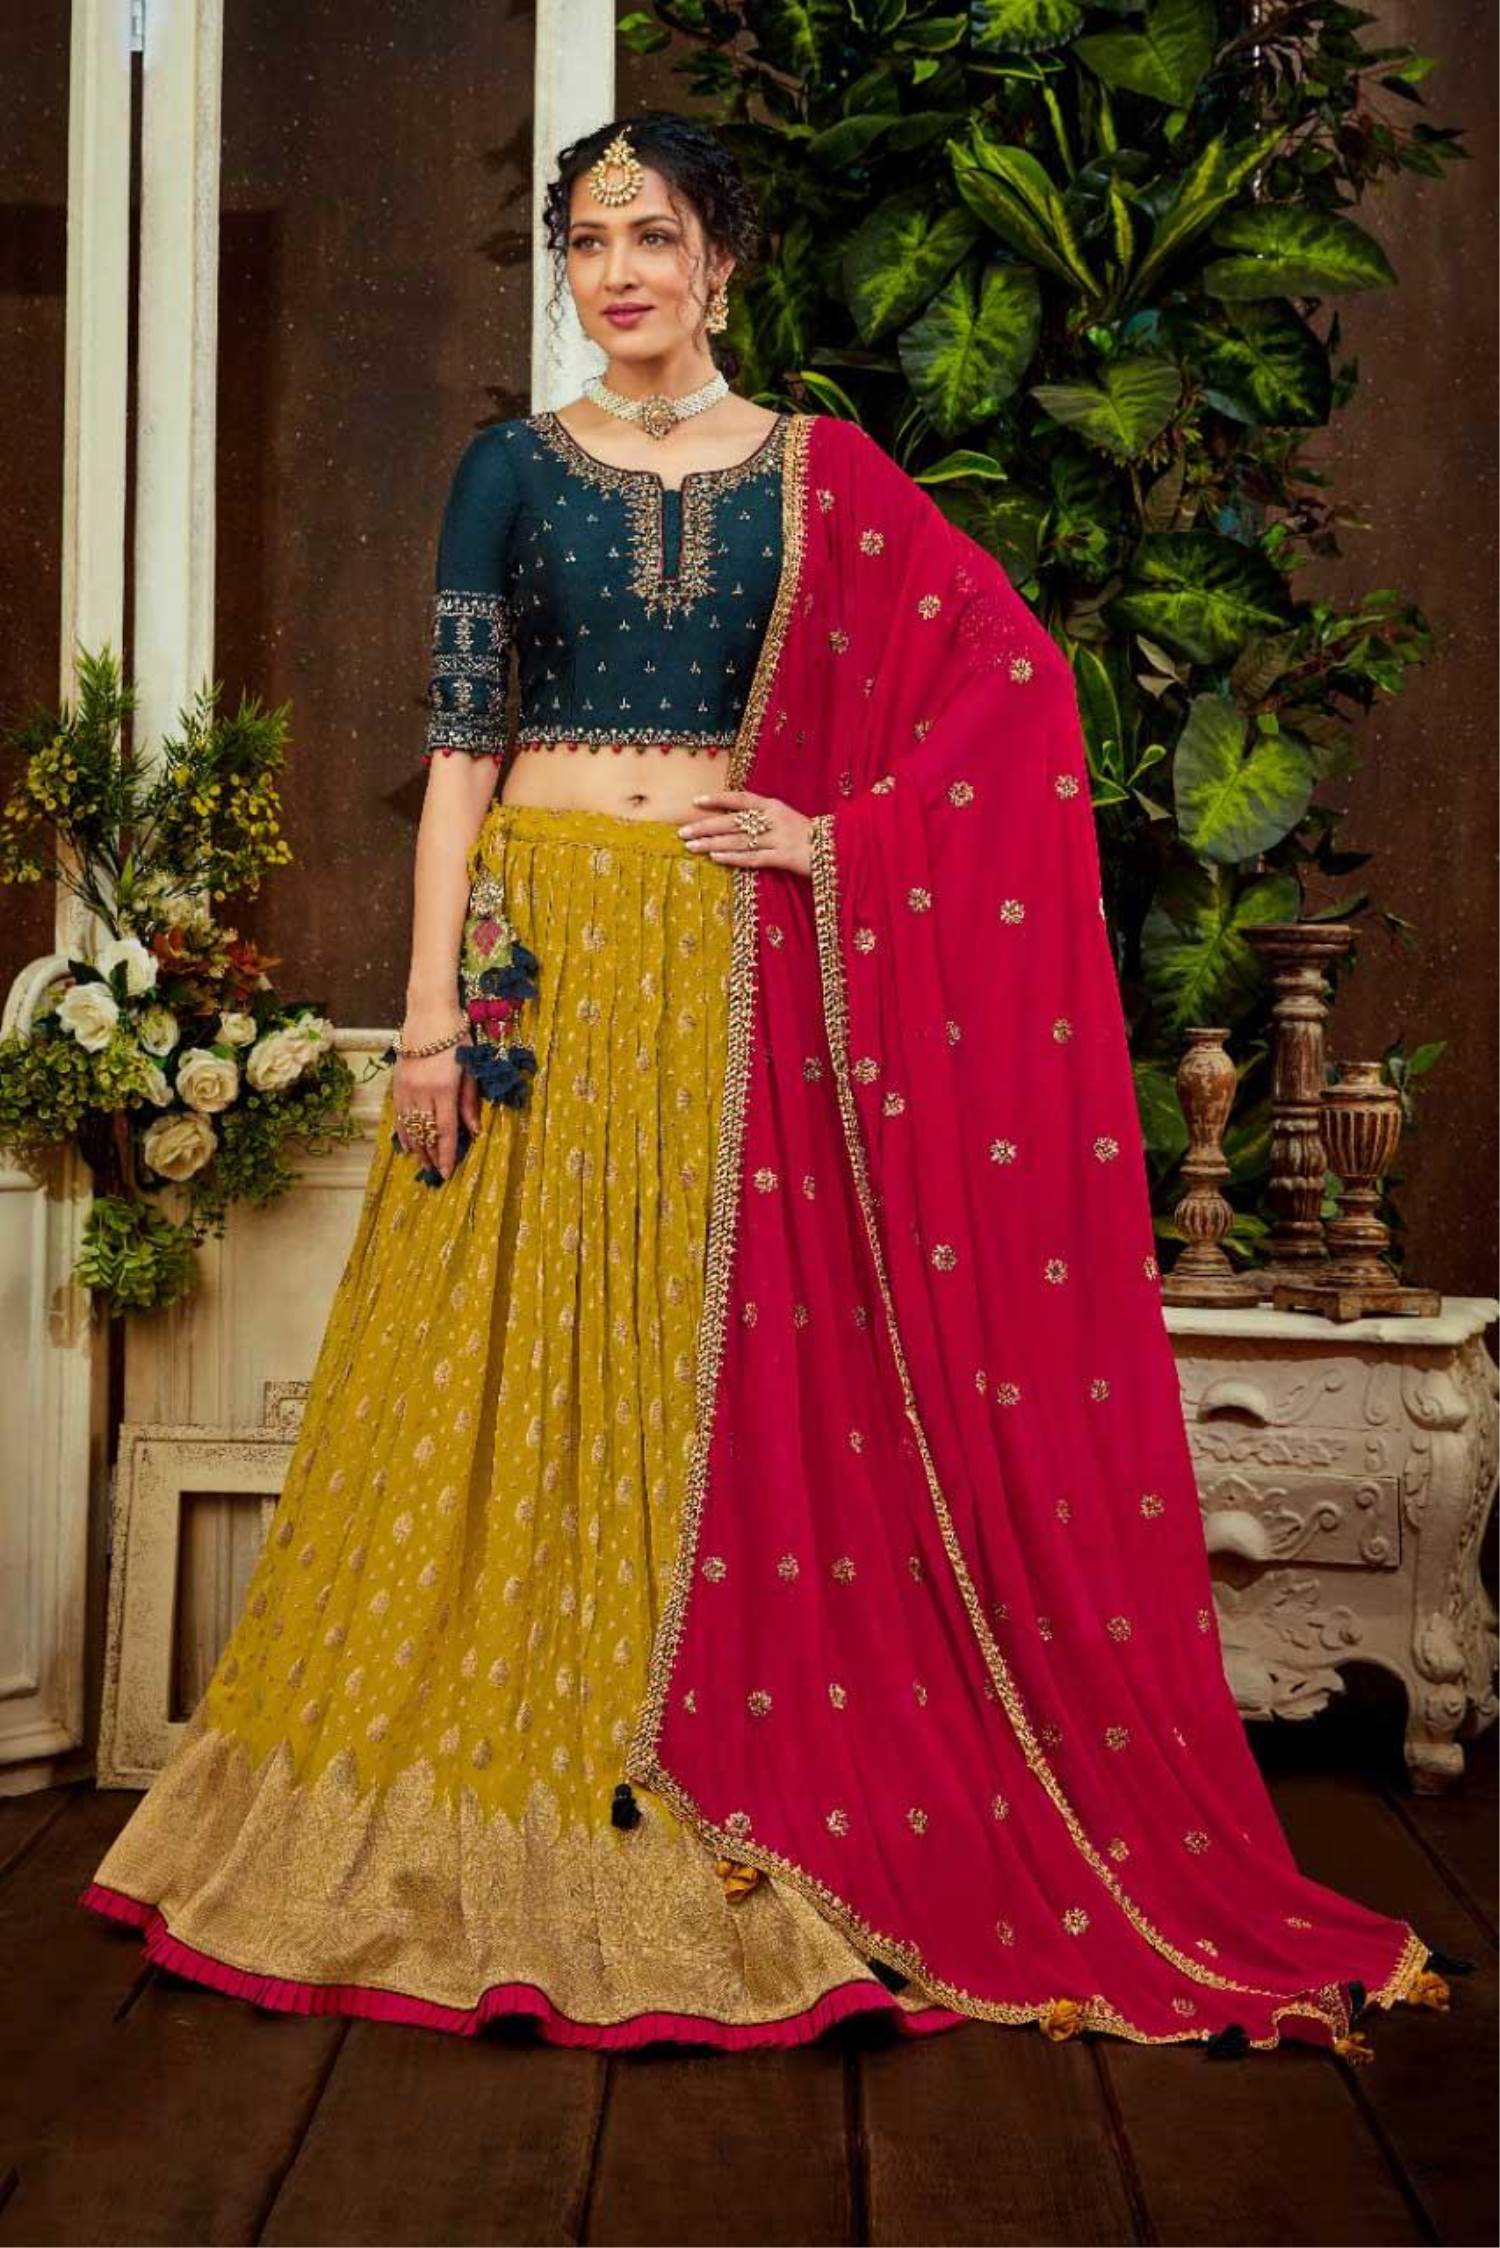 Buy Readiprint Fashions Readiprint Fashions Purple & Peach-Coloured  Embellished Sequinned Semi-Stitched Lehenga & Unstitched Blouse at Redfynd